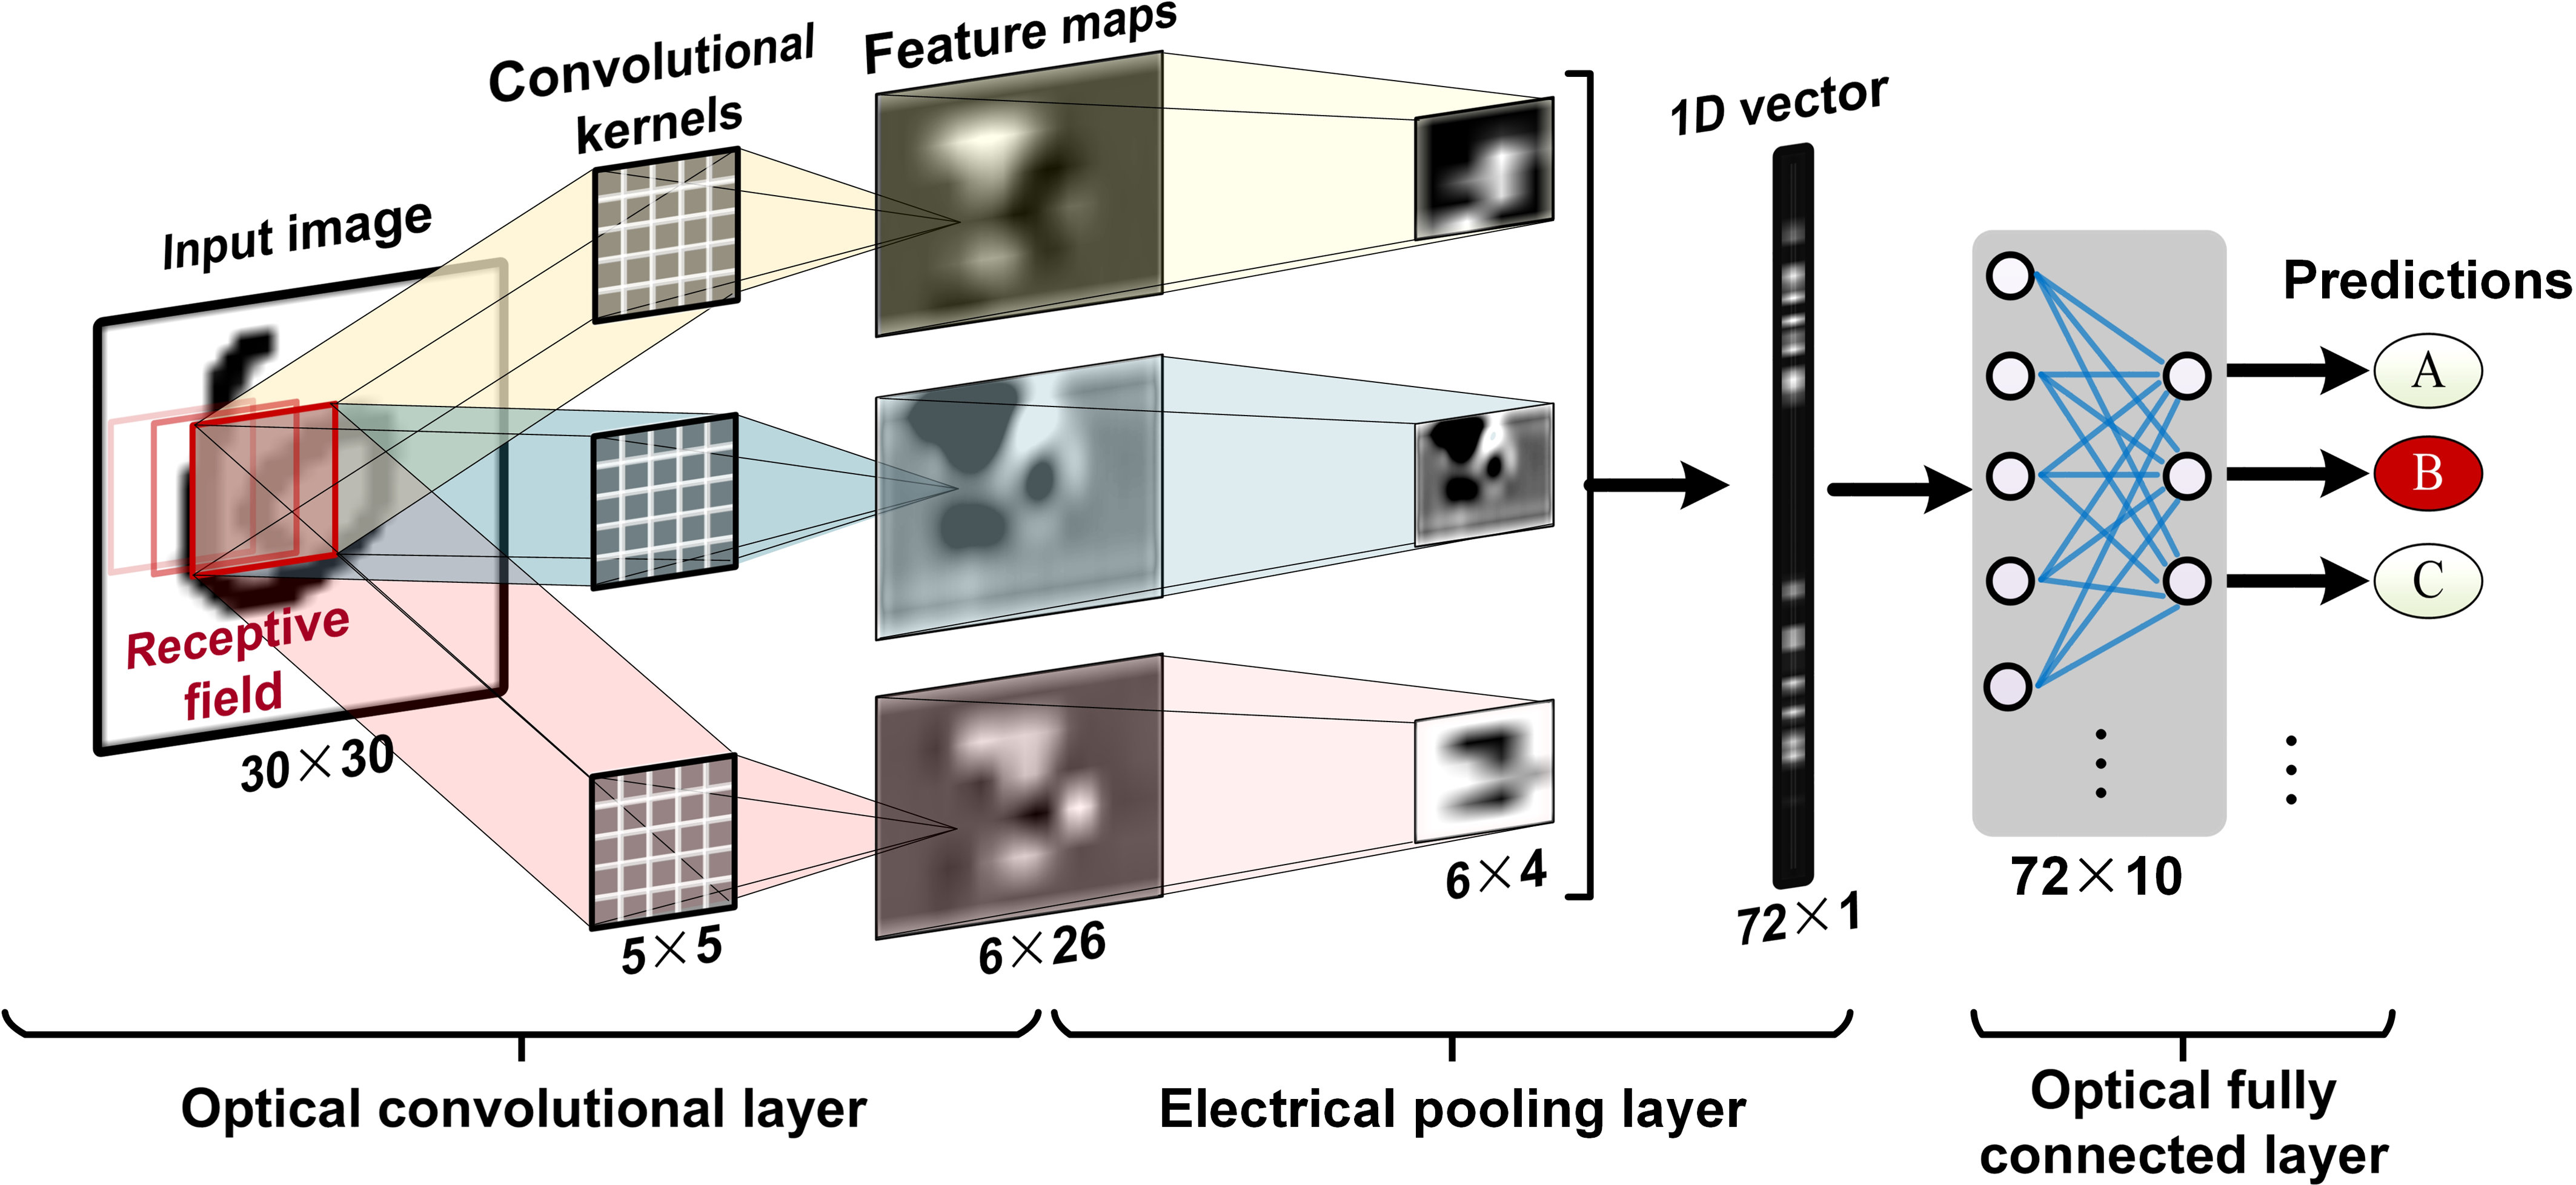 11 TOPS photonic convolutional accelerator for optical neural networks